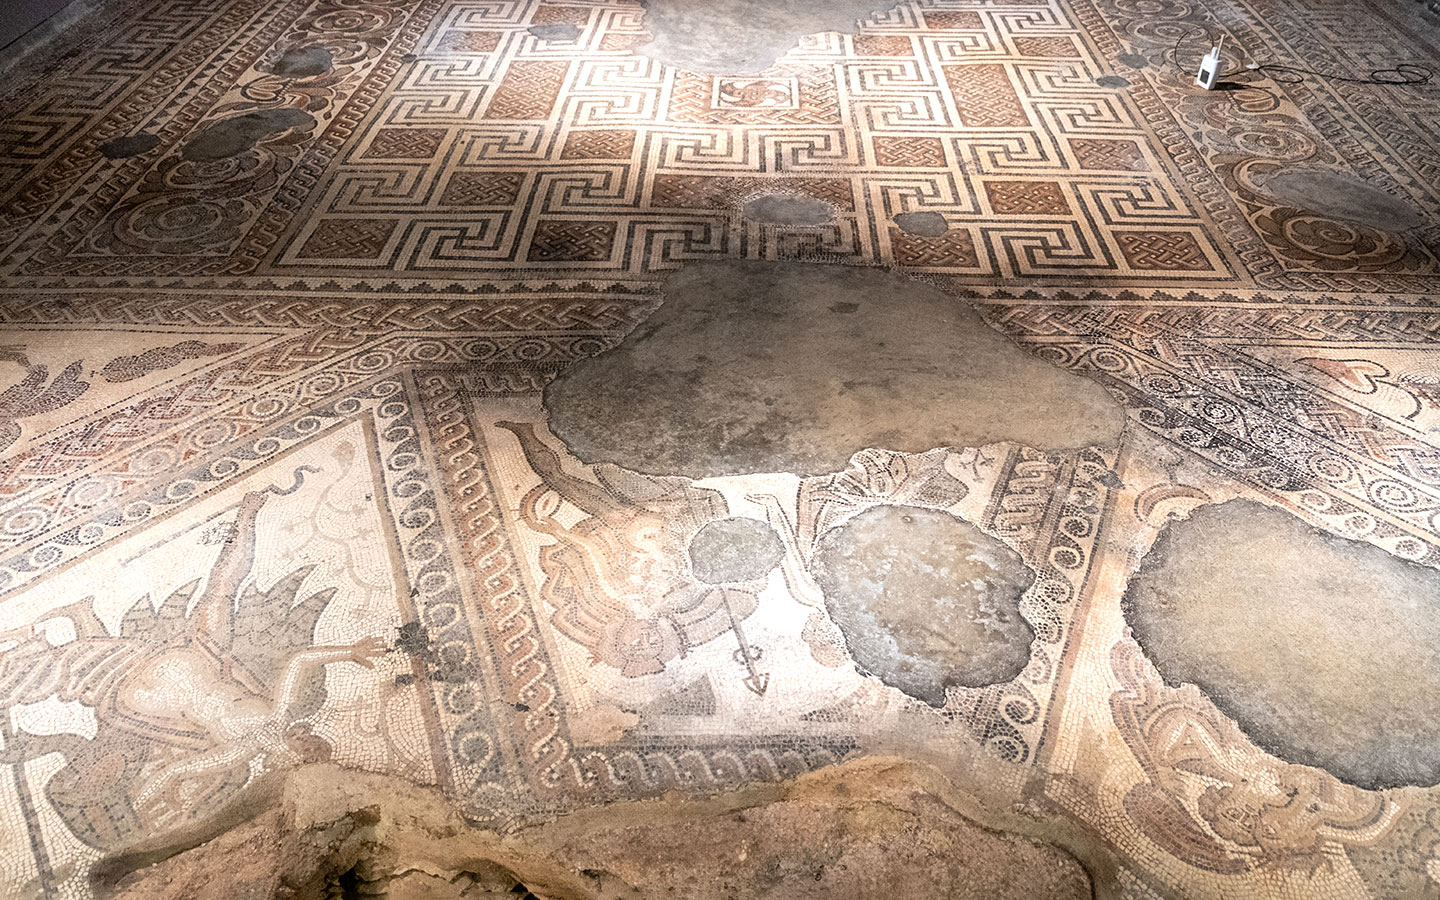 Mosaics at Chedworth Roman Villa in the Cotswolds